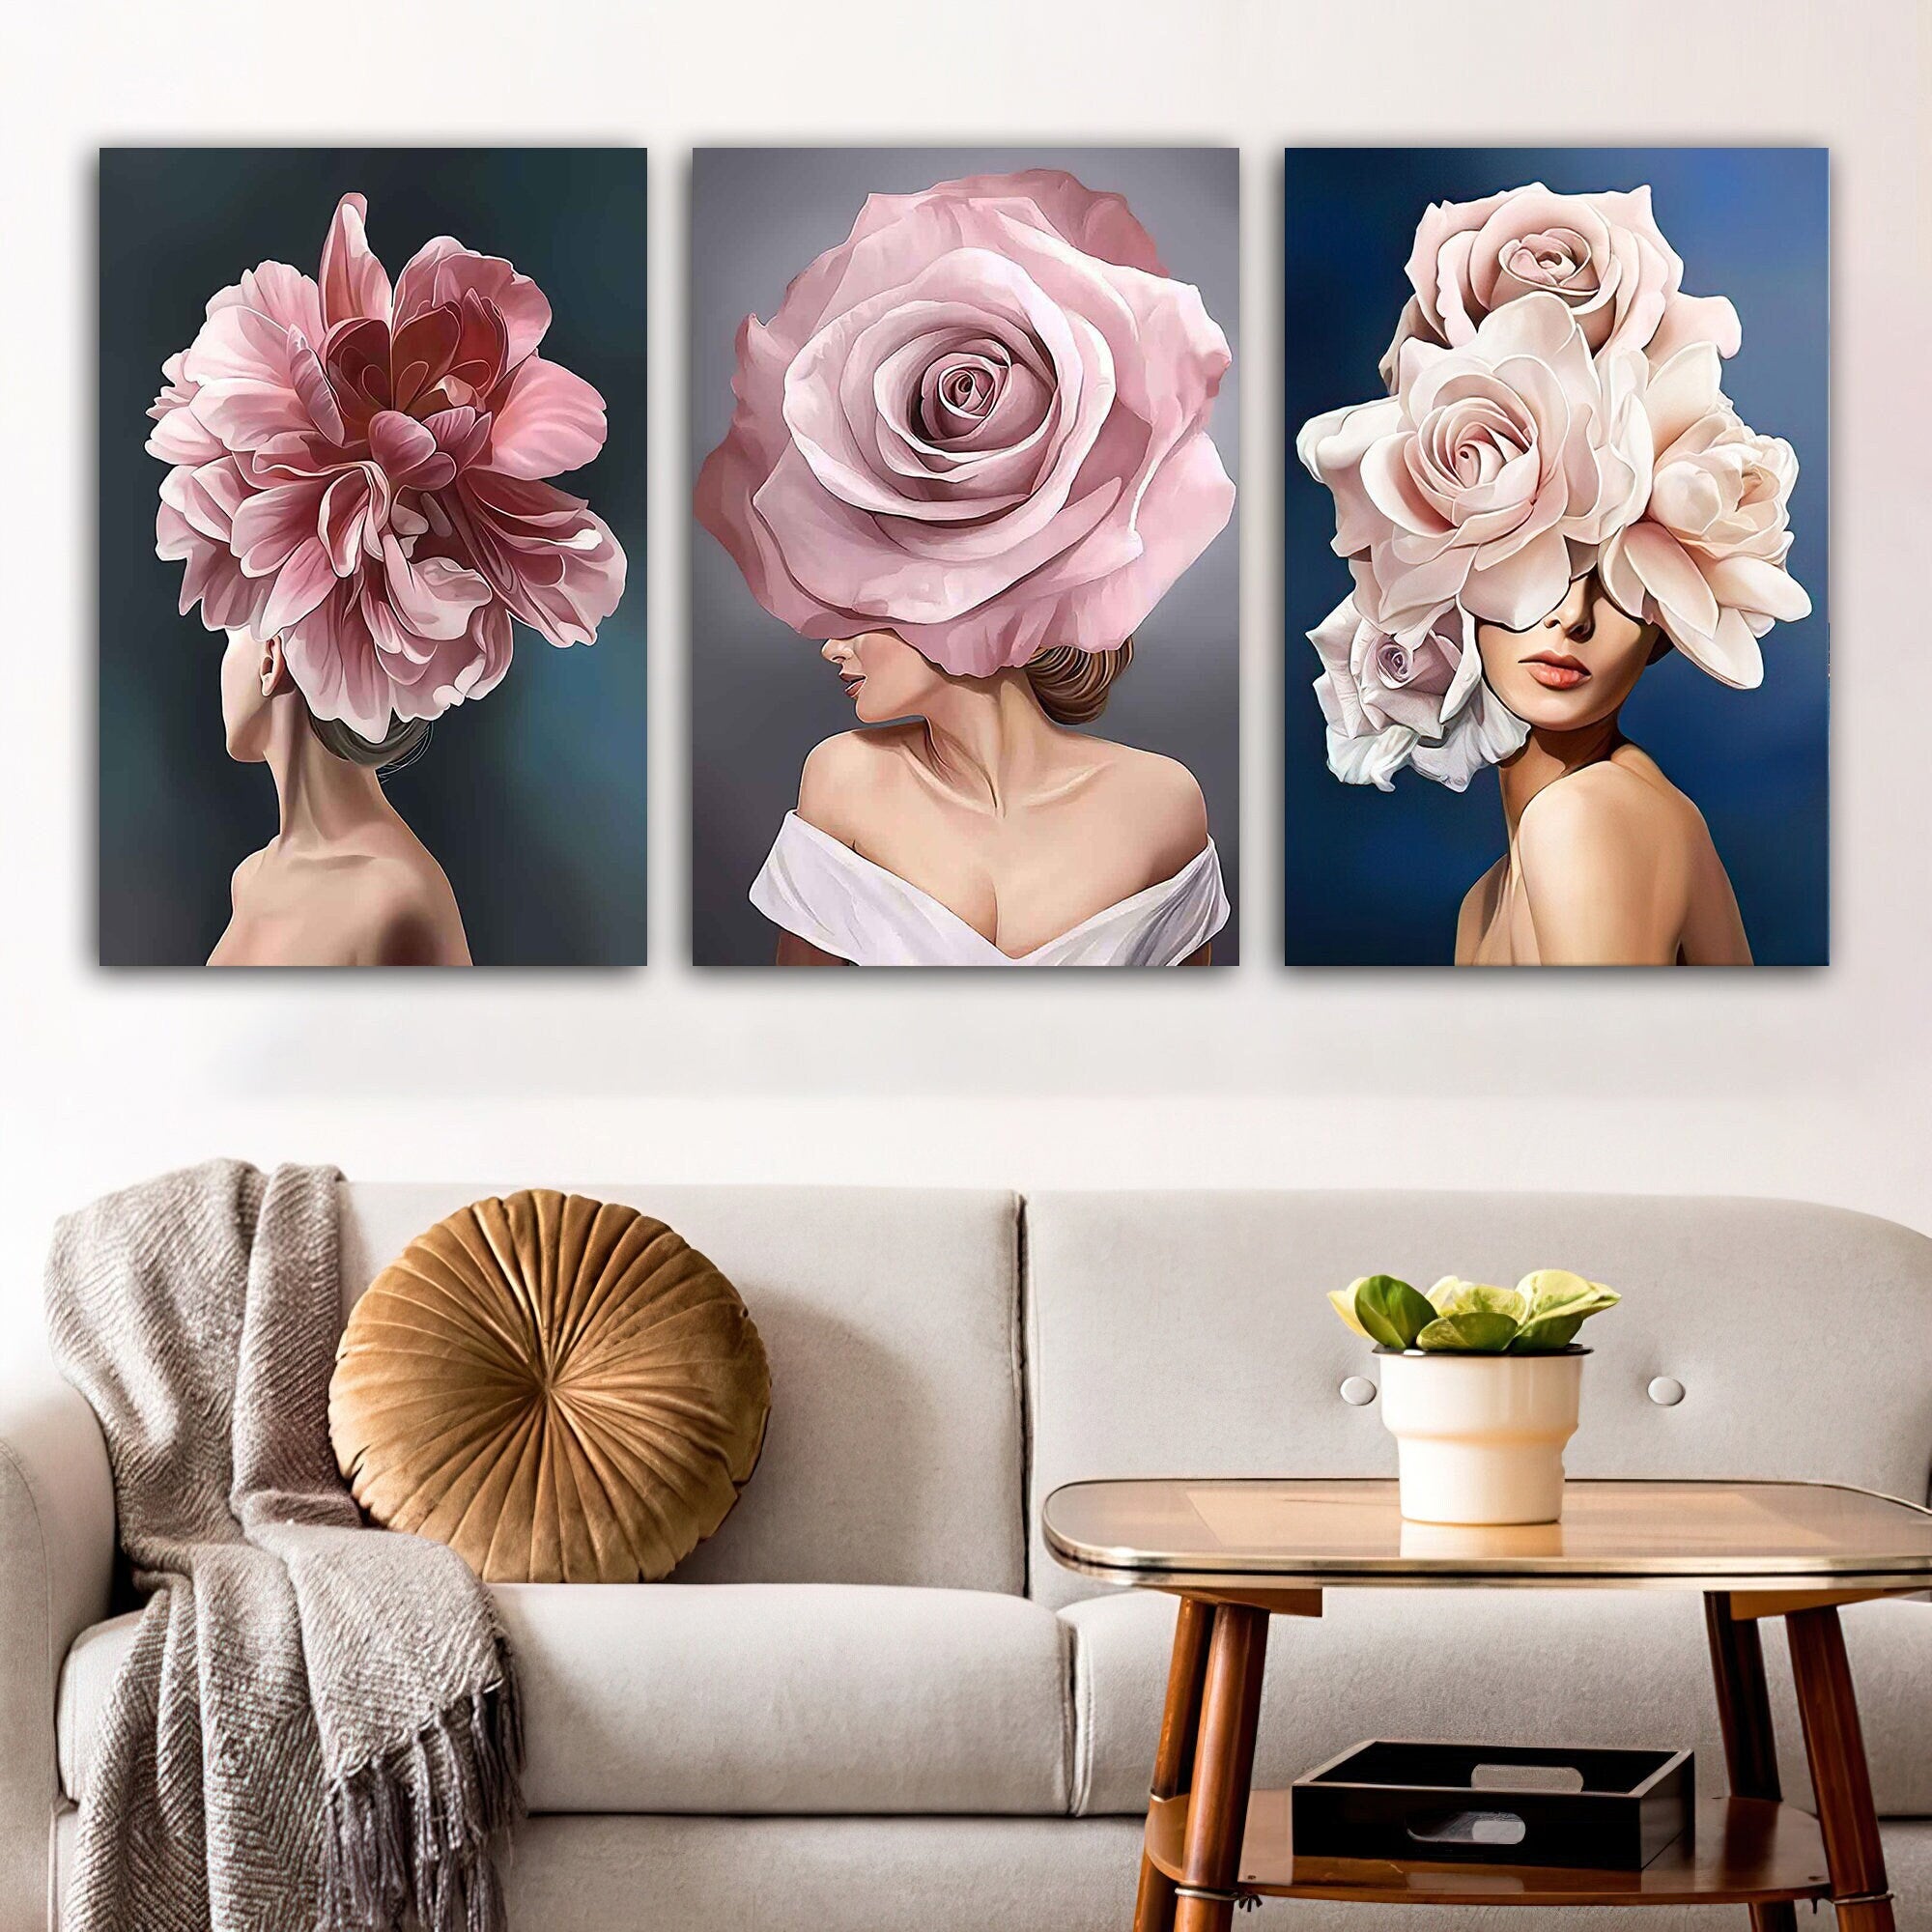 lady with flower body canvas print,woman with flower head canvas painting,artistic nude woman canvas painting,women wall decor modern